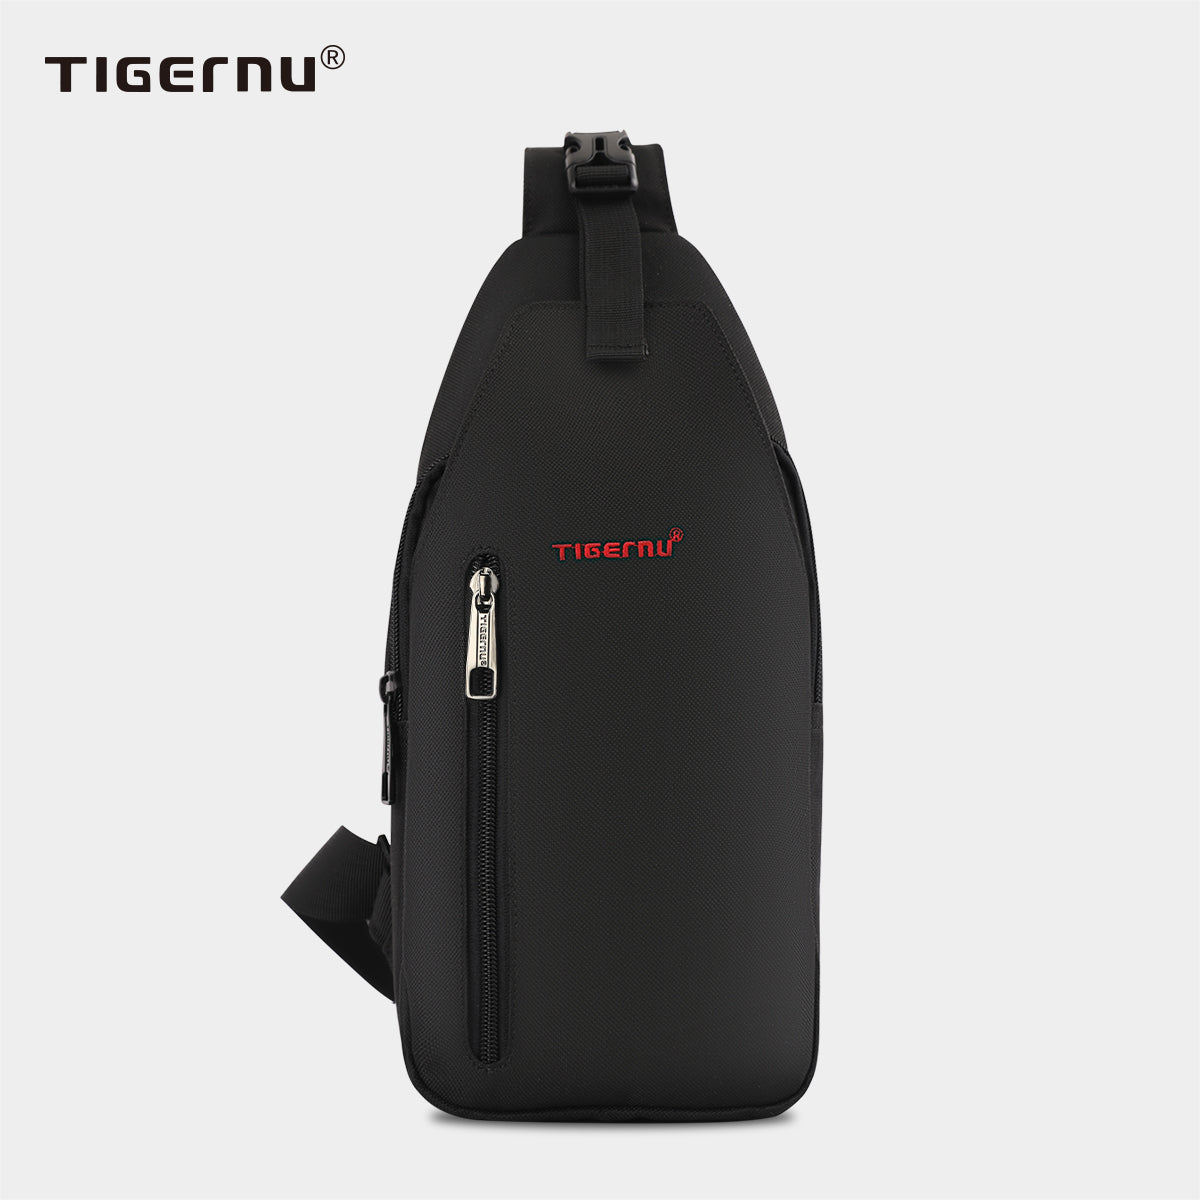 Tigernu New Arrival Motor bag phone bicycle sling bag Chest outdoor sports sling bag for bicycle